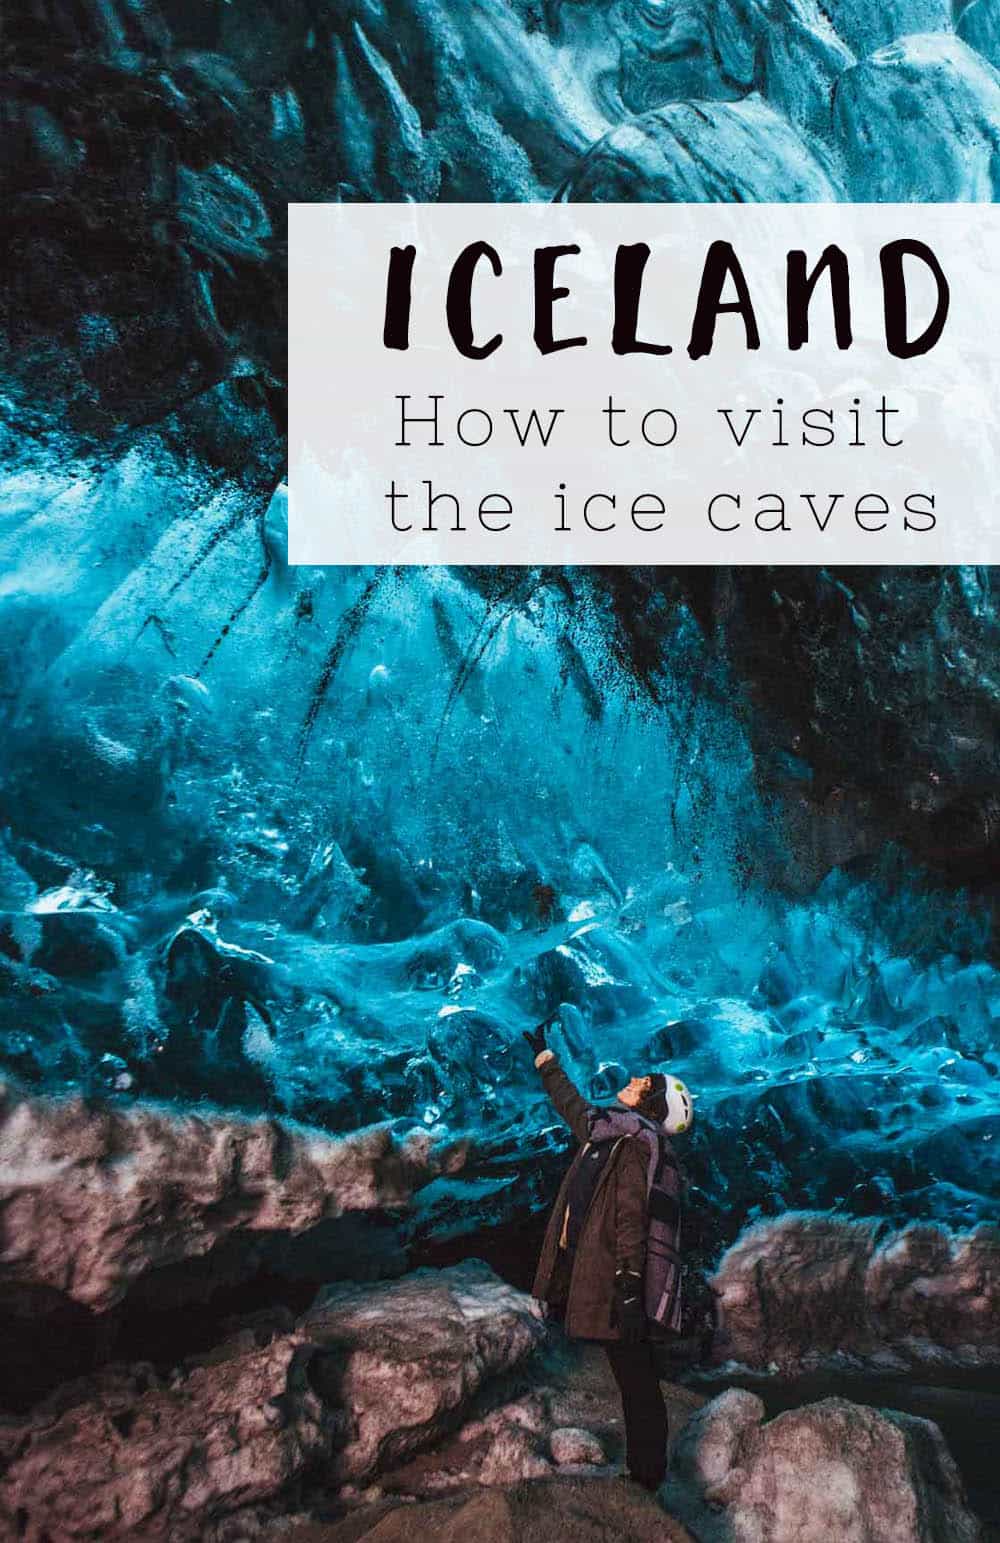 A guide to Iceland's Ice Caves